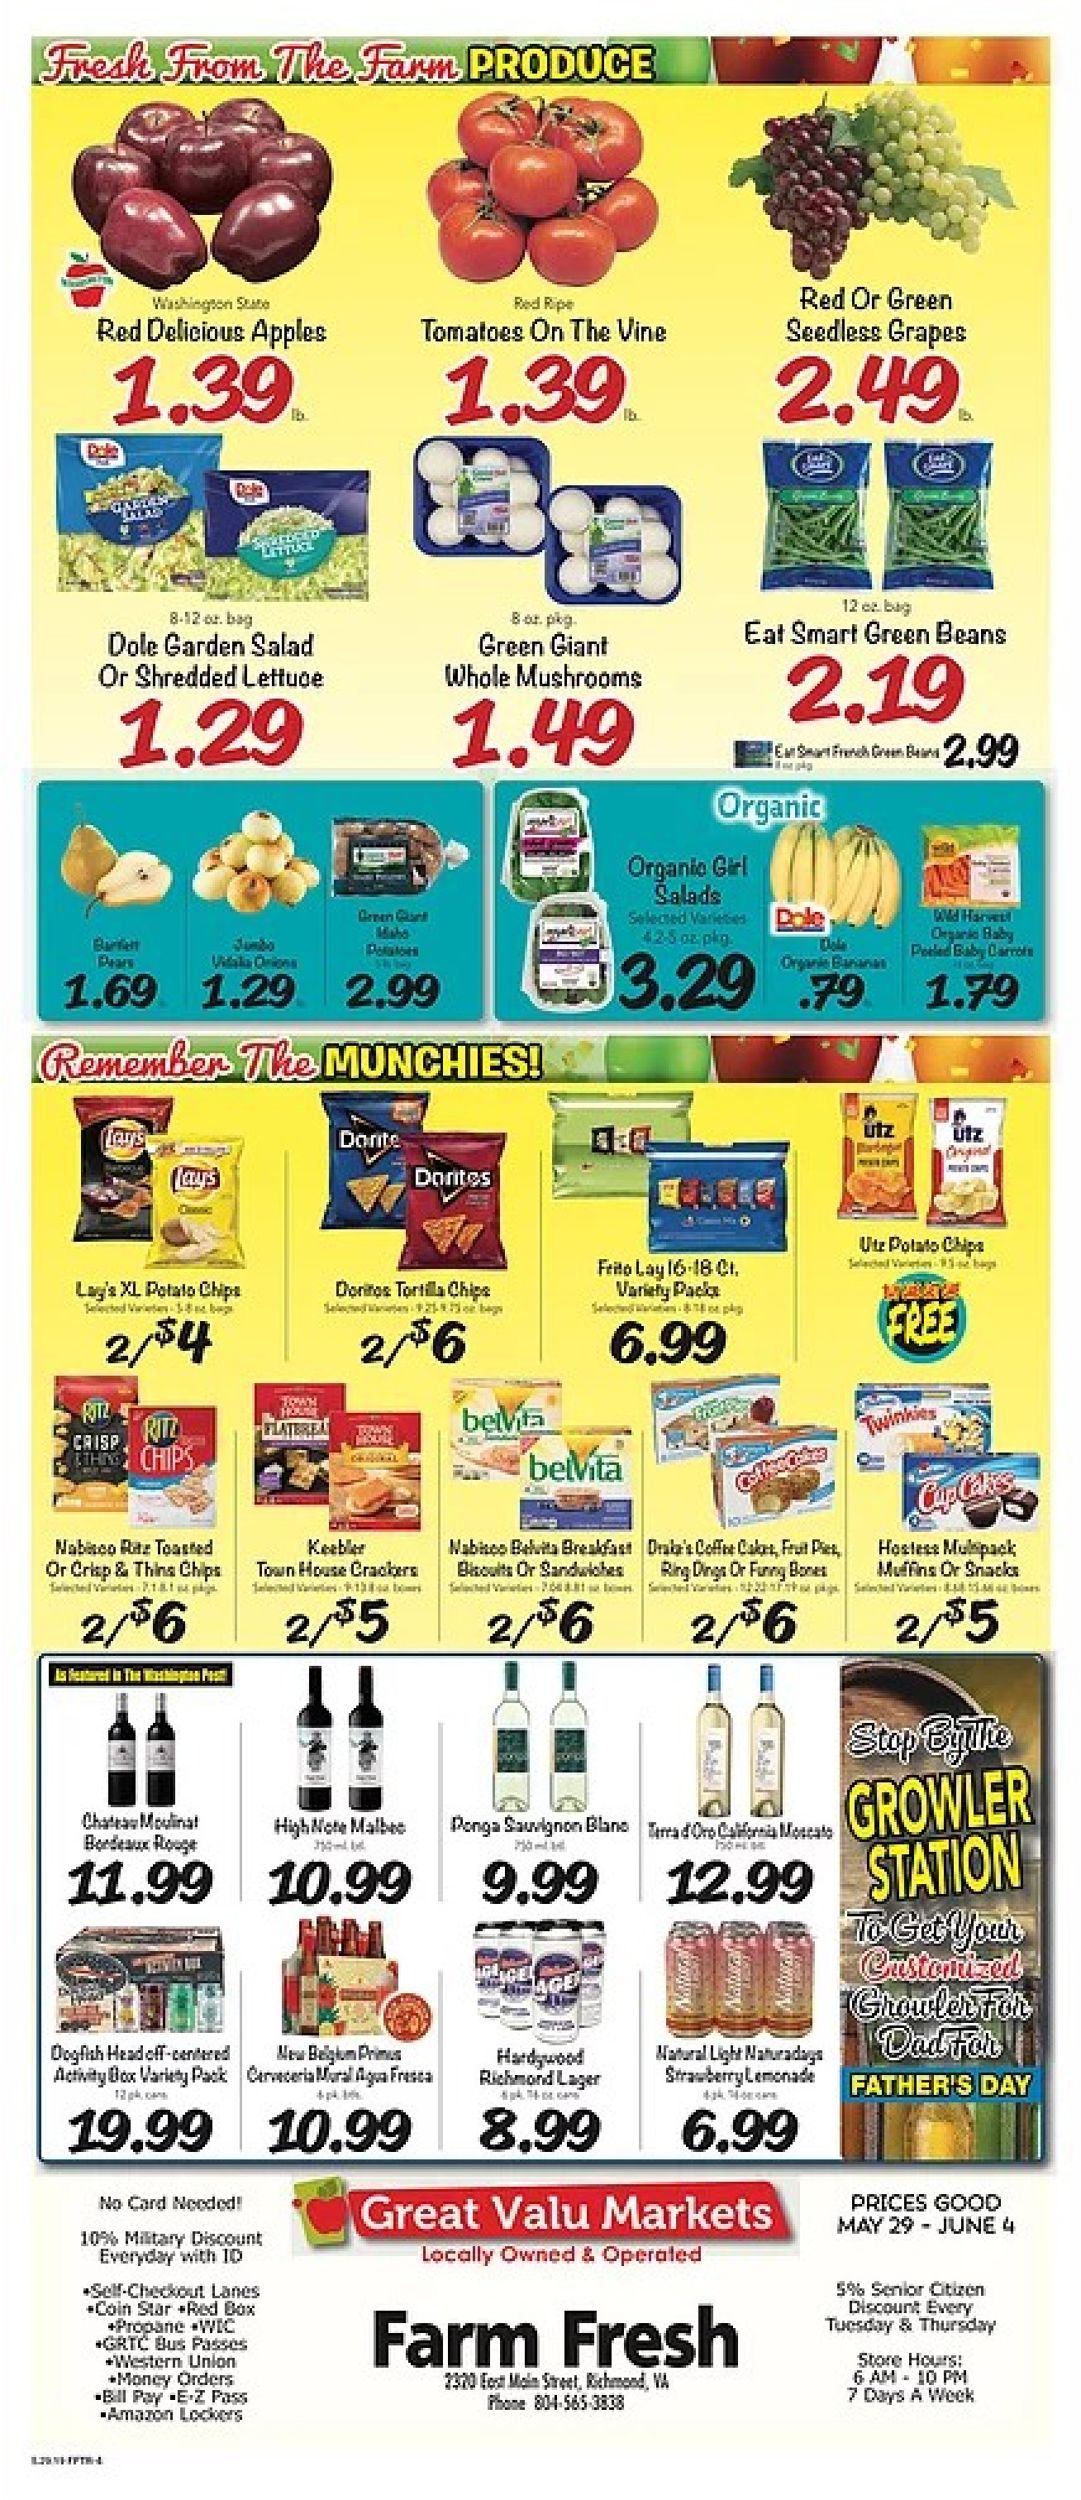 Farm Fresh Current weekly ad 05/29 - 06/04/2019 [4] - frequent-ads.com